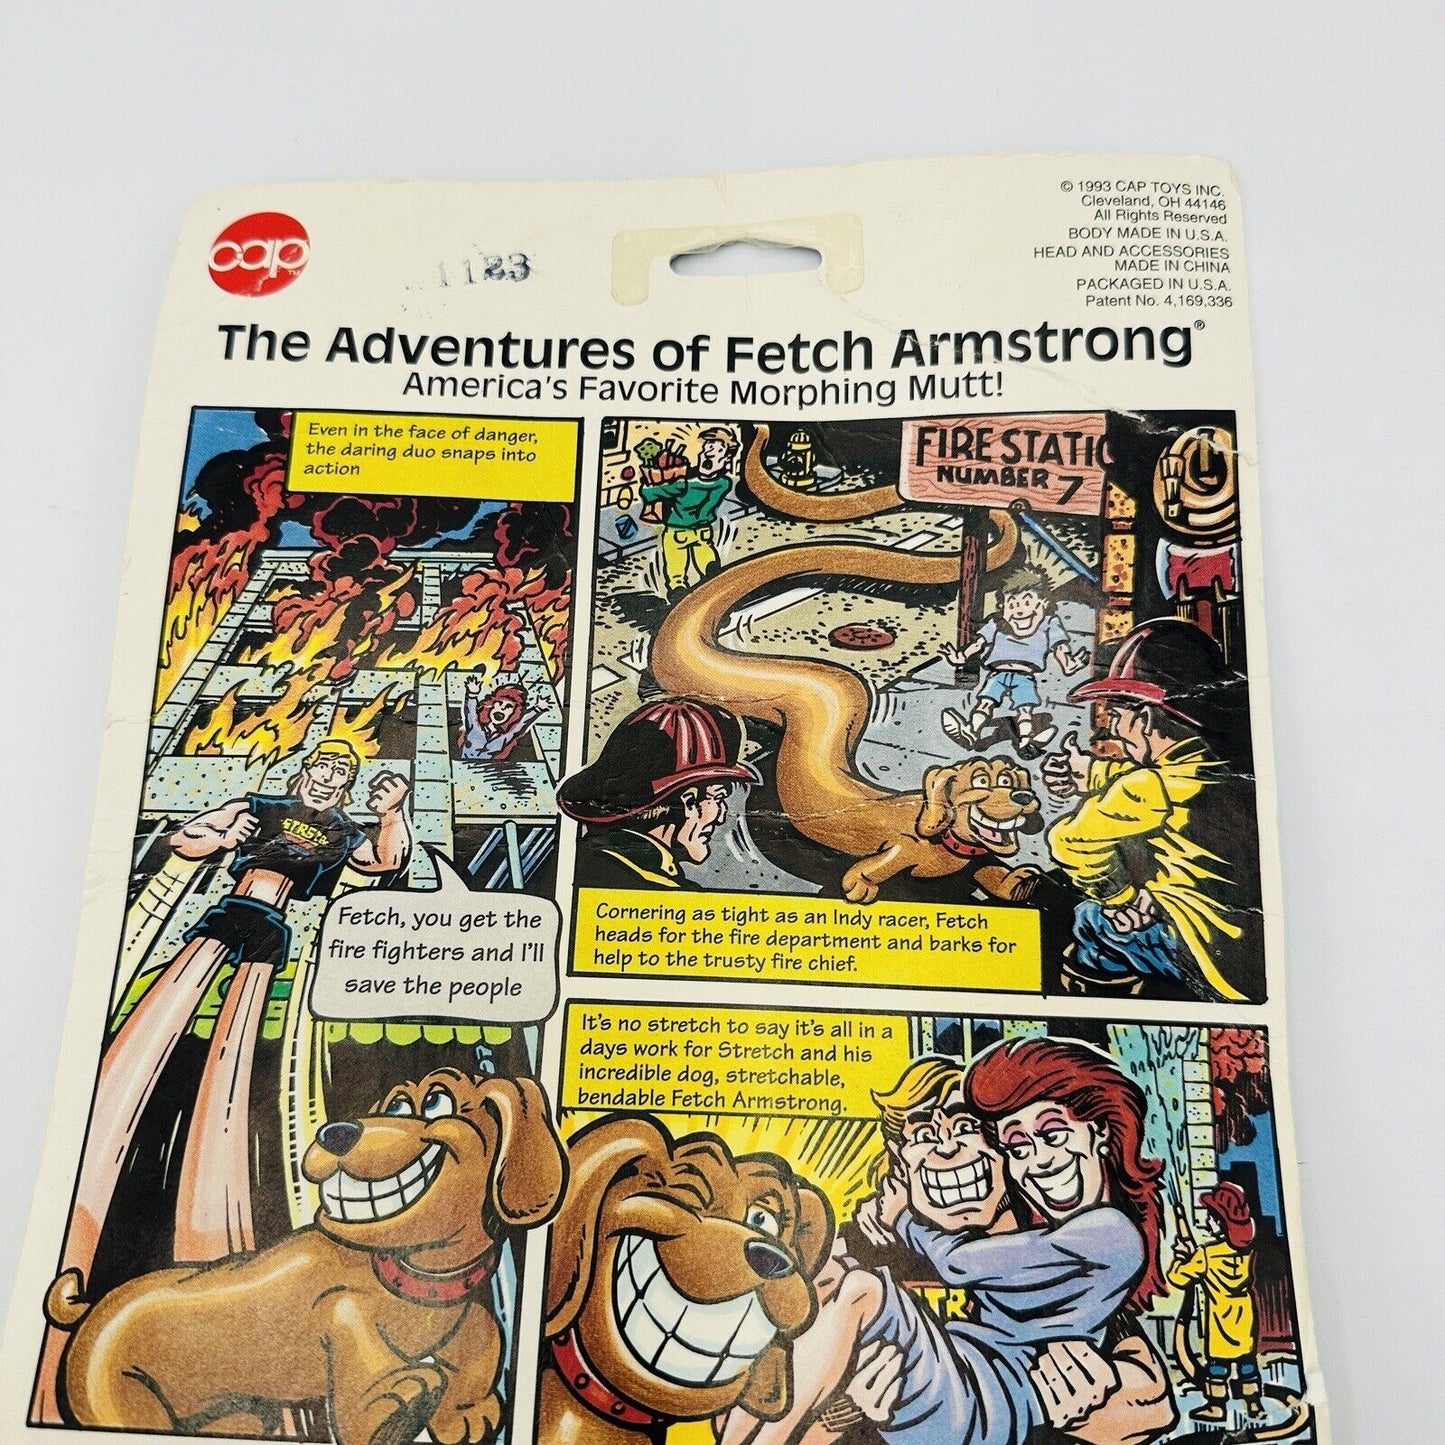 Cap Mini Action Toy Fetch Armstrong 1993 3x Stretches Actual Size Sealed